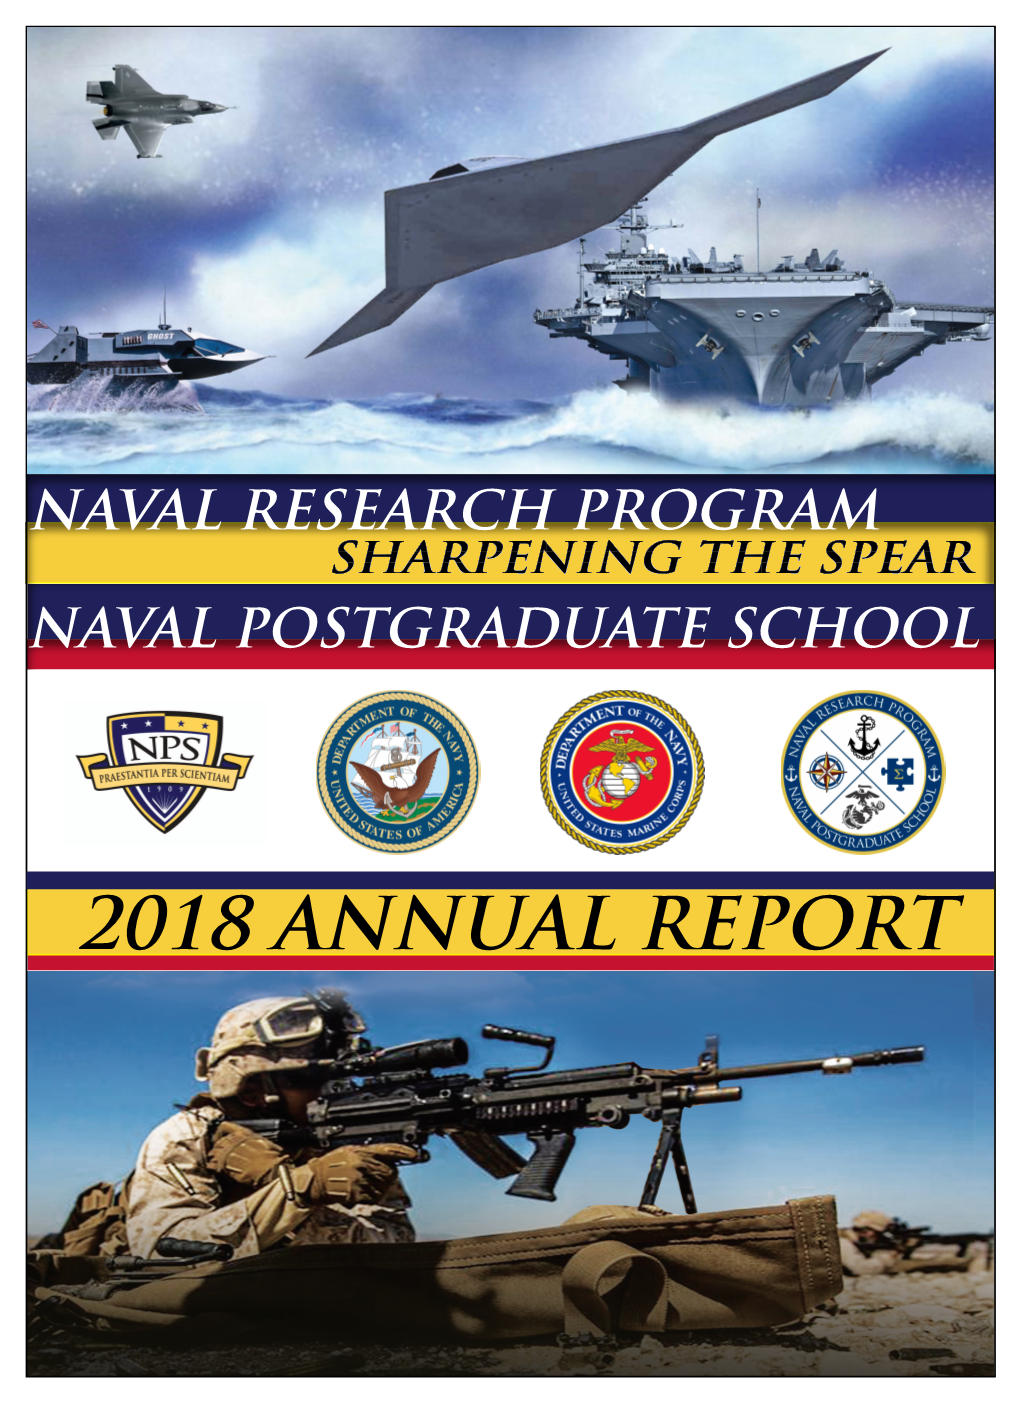 NRP FY18 Annual Report